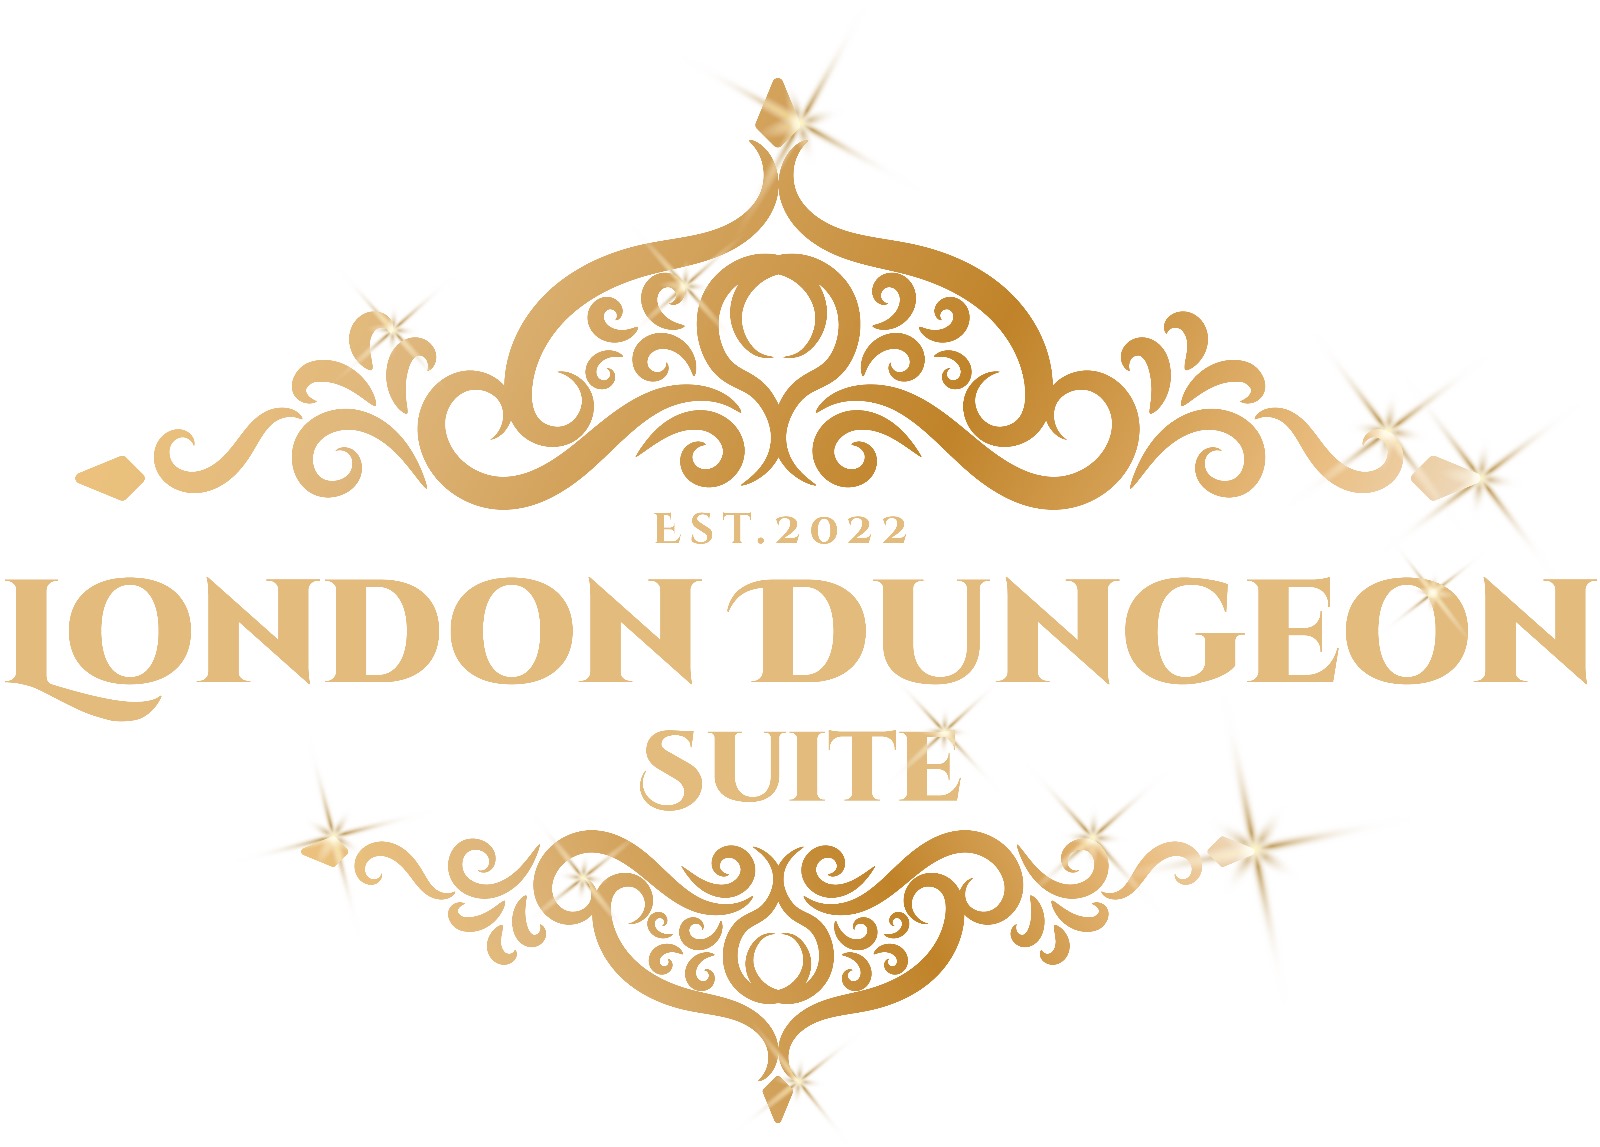 London Dungeon Suite